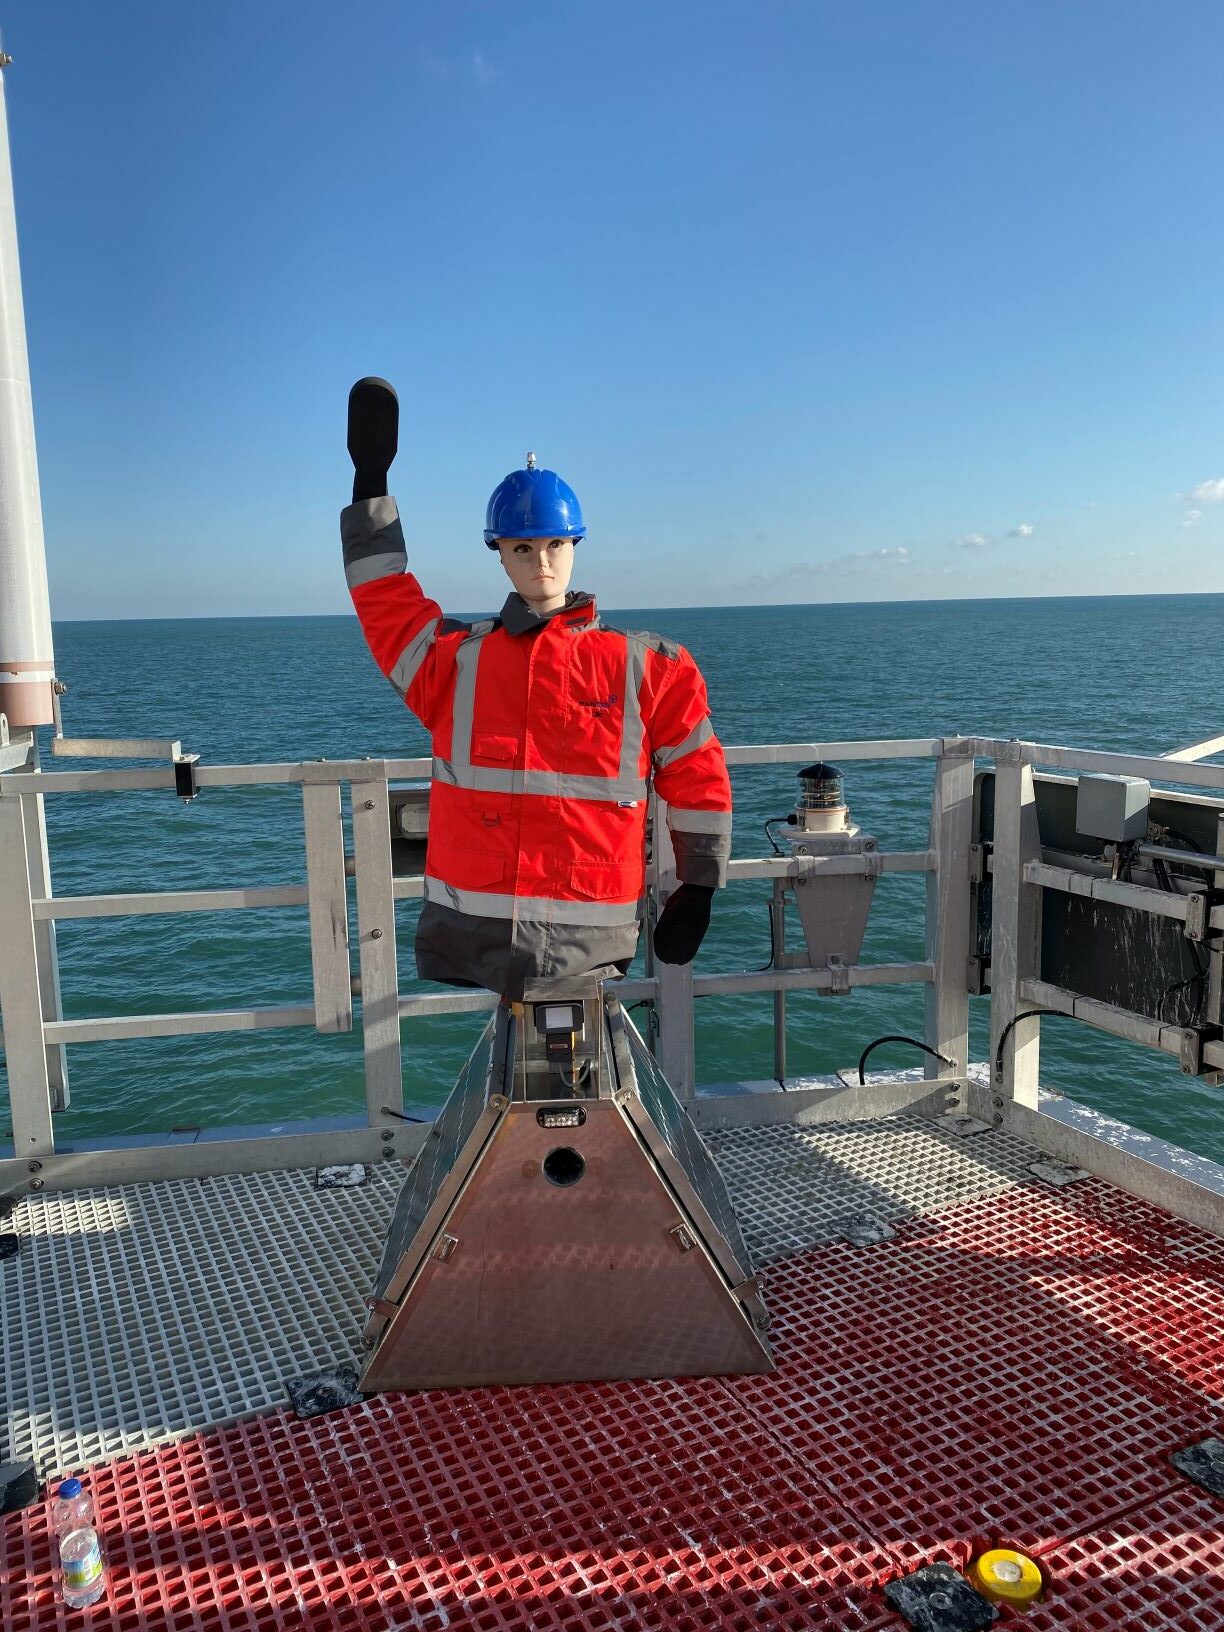 Offshore-Wind-Scarecrow-System-Proves-Its-Mettle